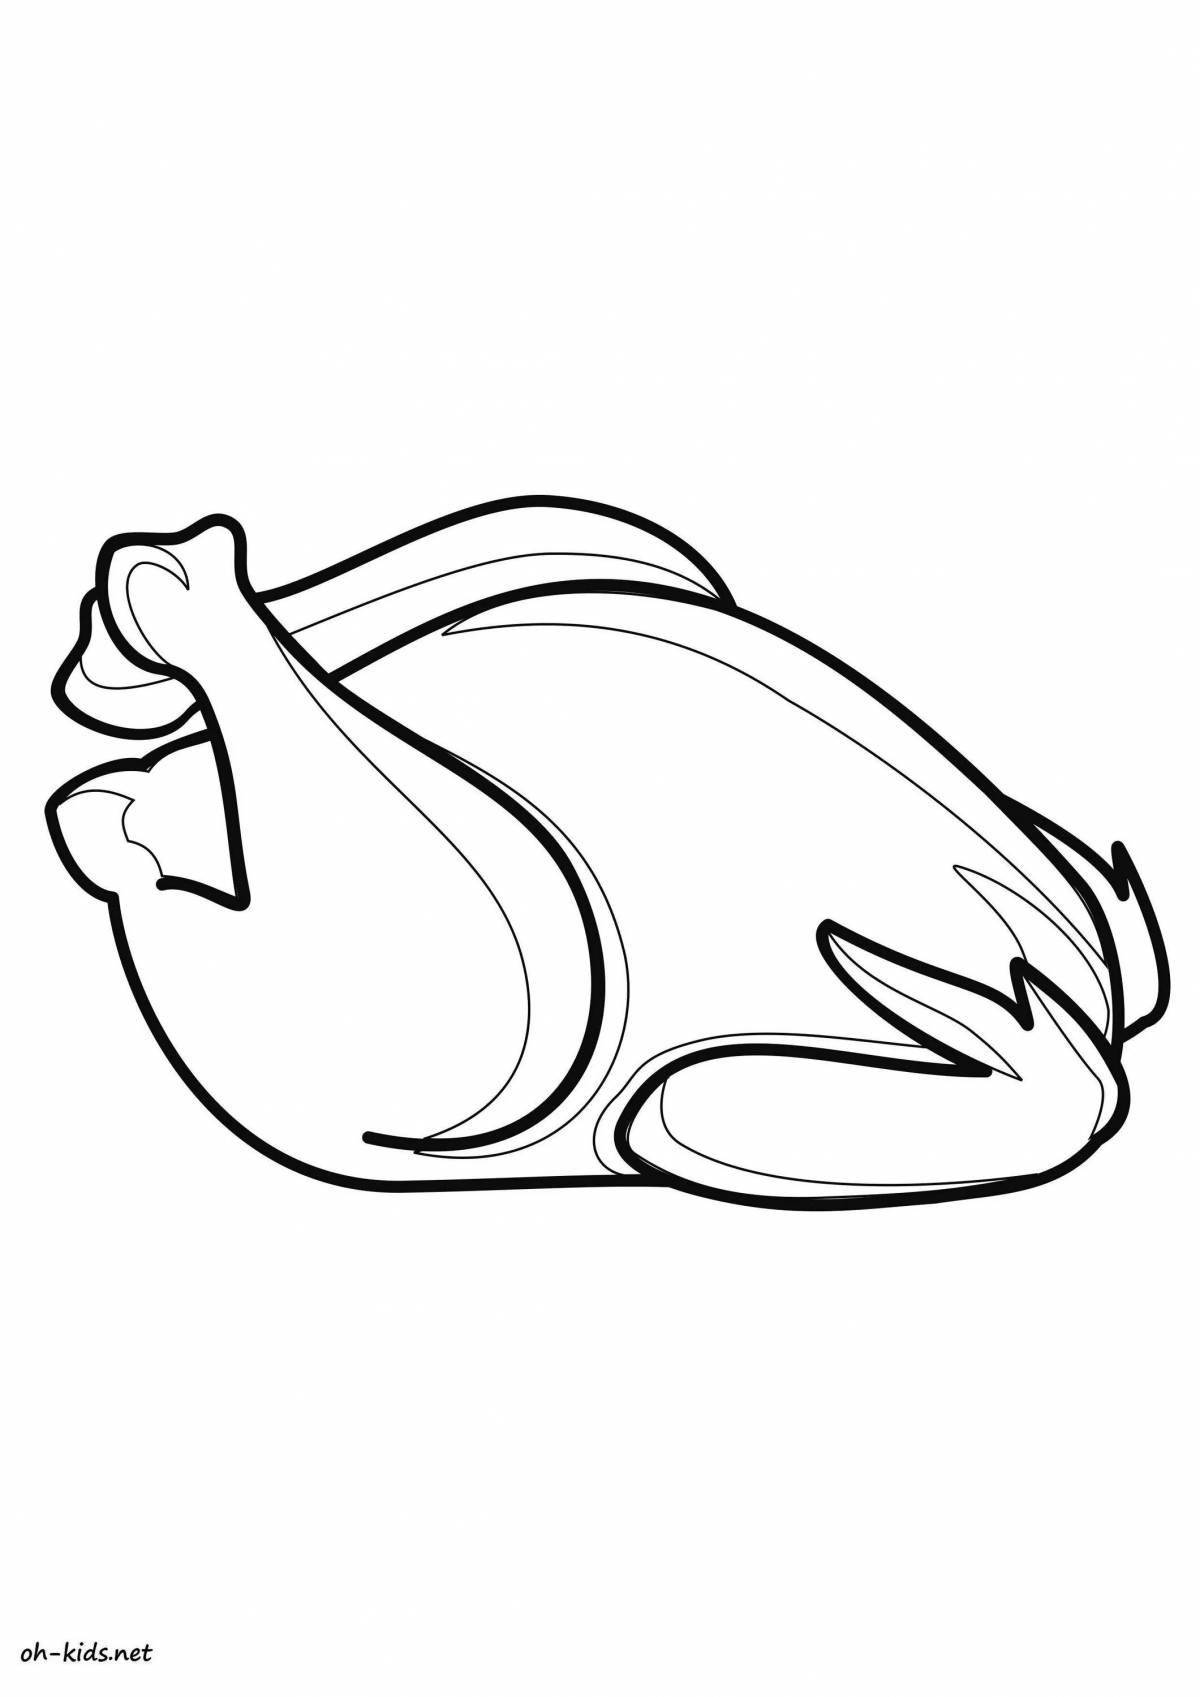 Inviting chicken food coloring page